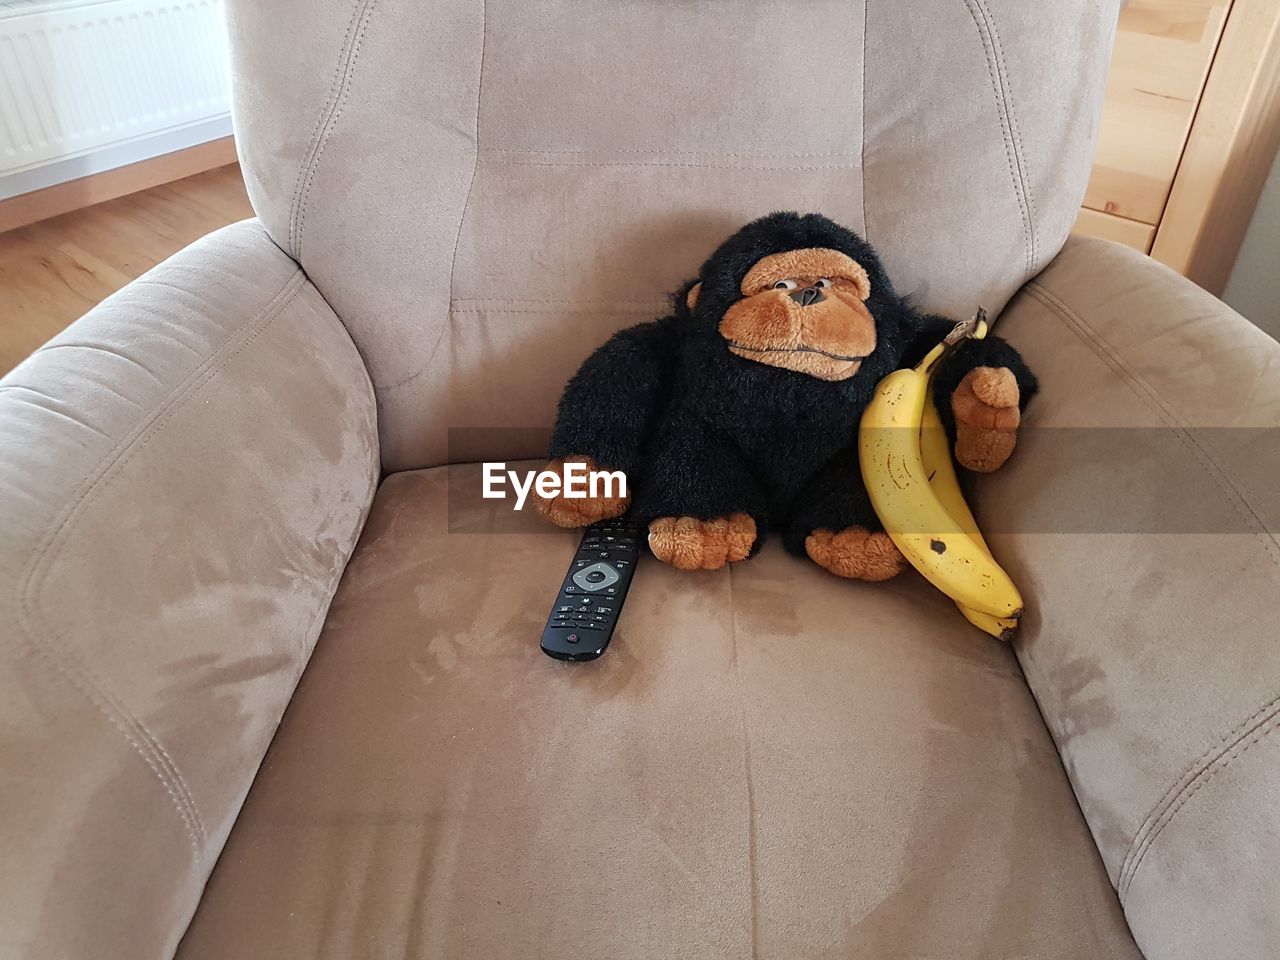 Stuffed toy and bananas on couch